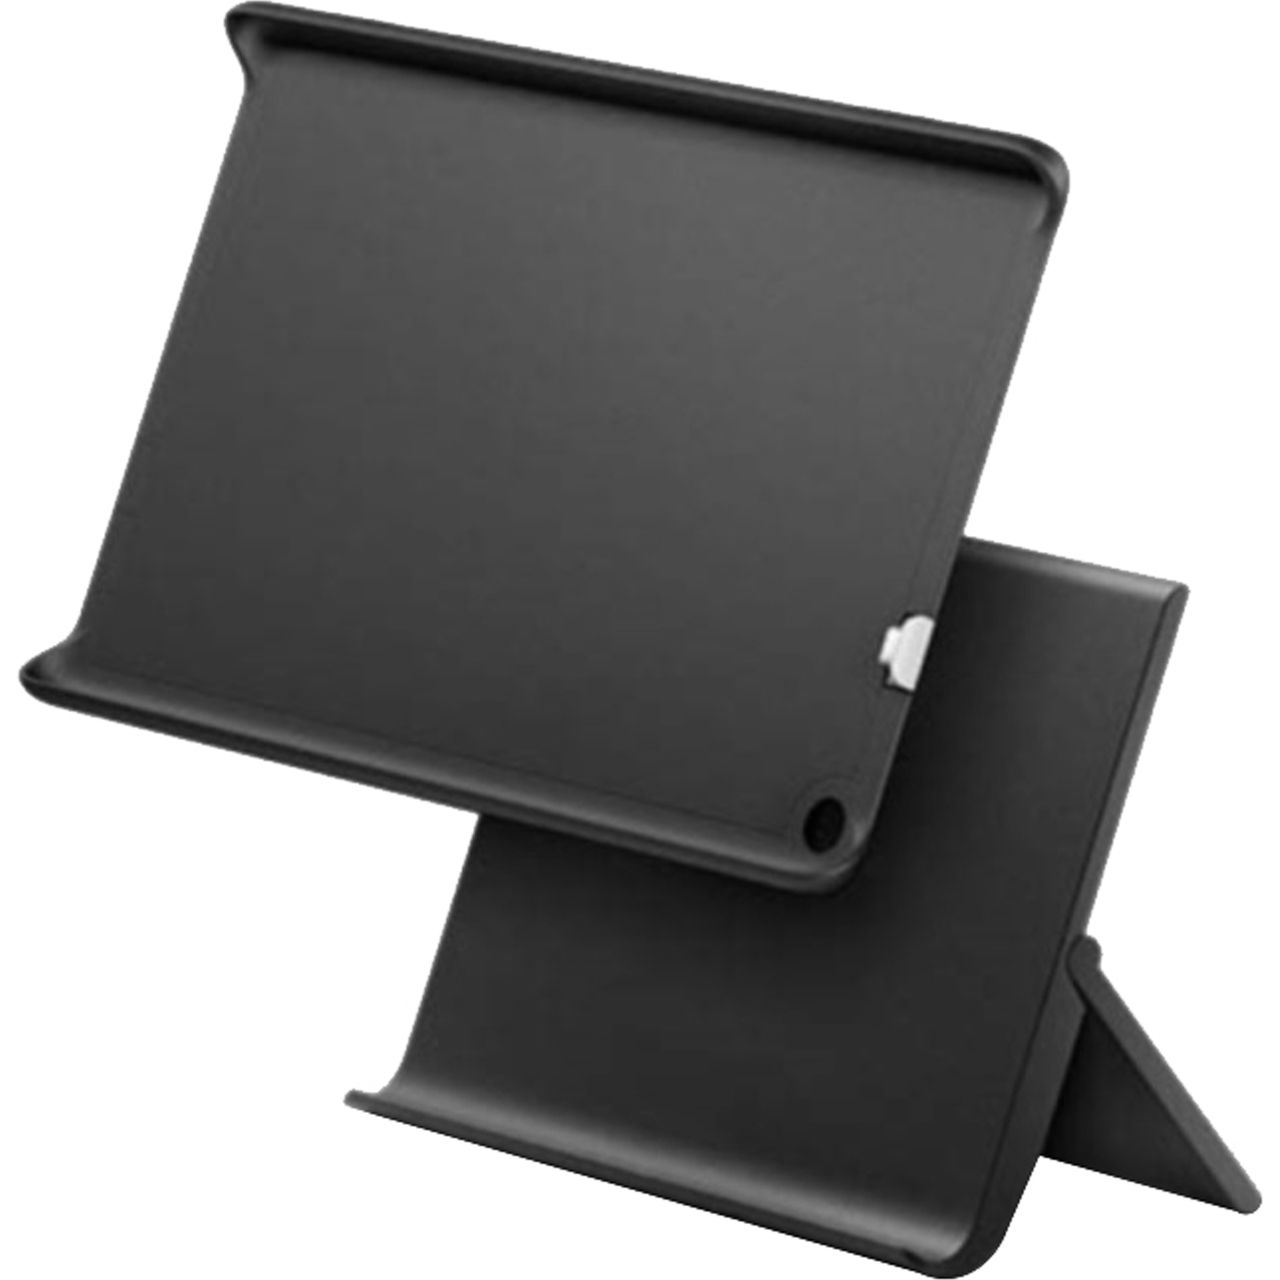 Amazon Fire Tablet Fire HD 10” Charging Dock Review